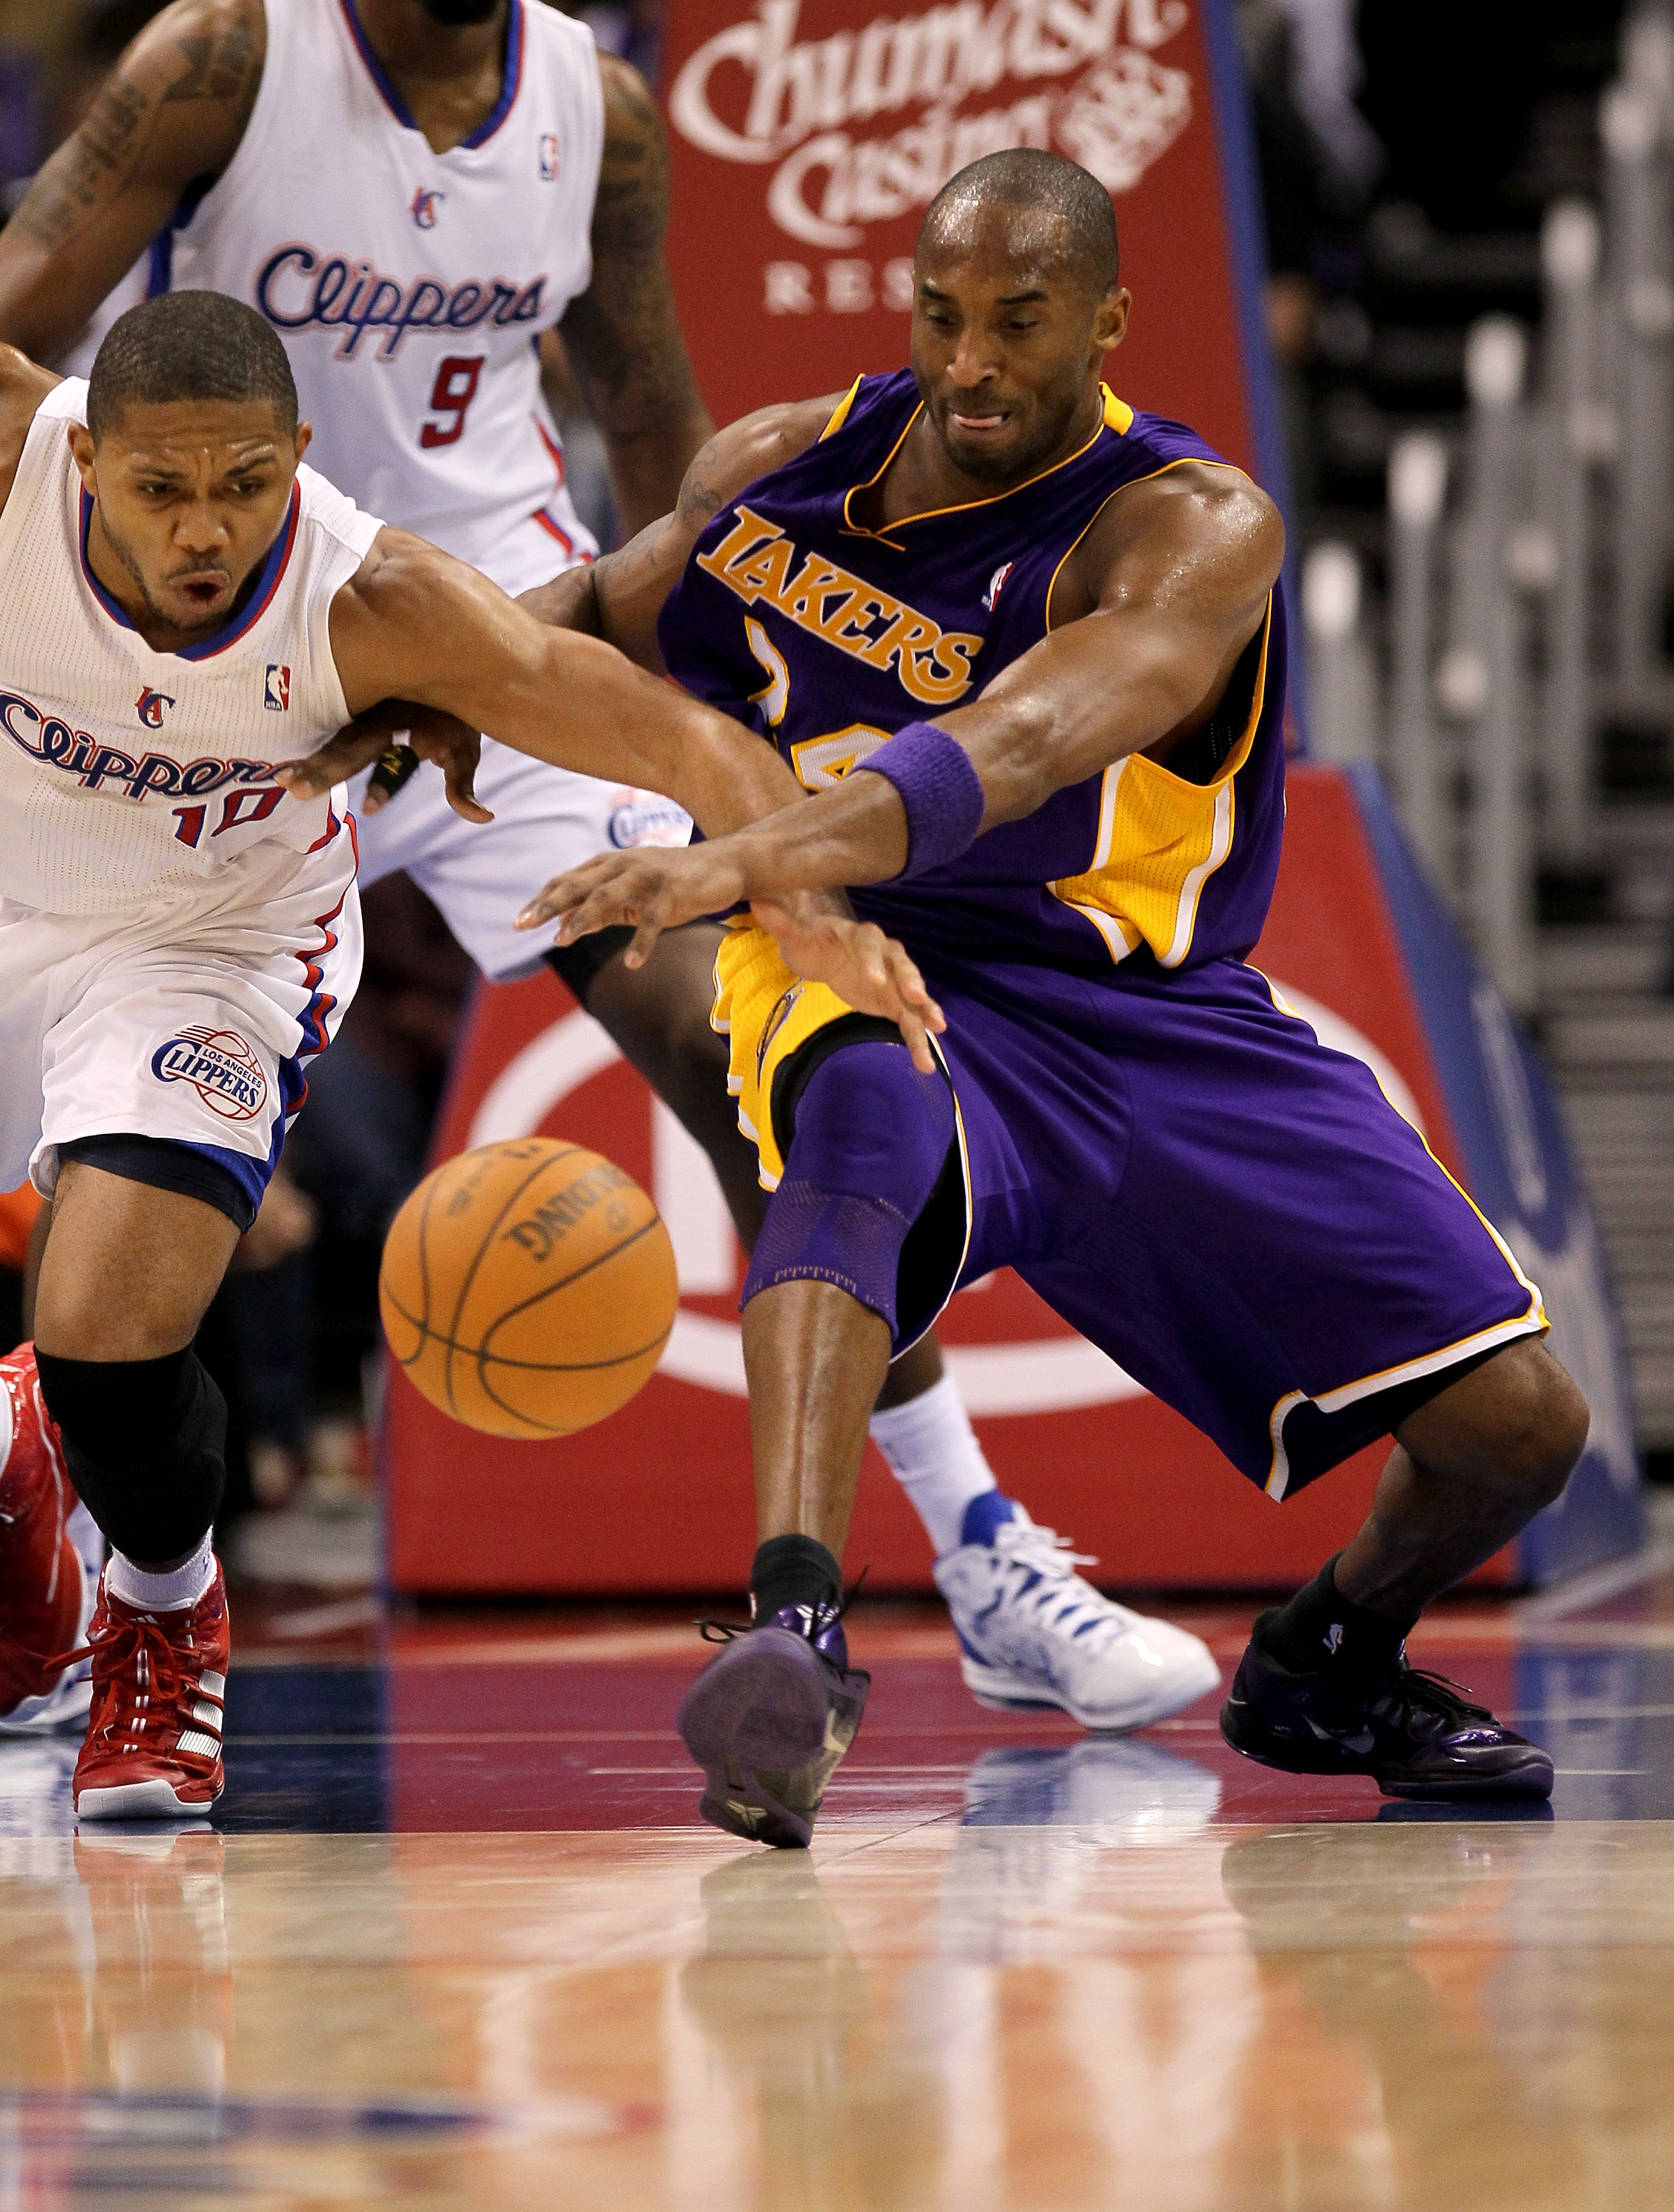 LOS ANGELES, CA - DECEMBER 08:  Kobe Bryant #24 of the Los Angeles Lakers battles to control a loose ball against Eric Gordon #10 of the Los Angeles Clippers at Staples Center on December 8, 2010 in Los Angeles, California.  The Lakers won 87-86.  NOTE TO